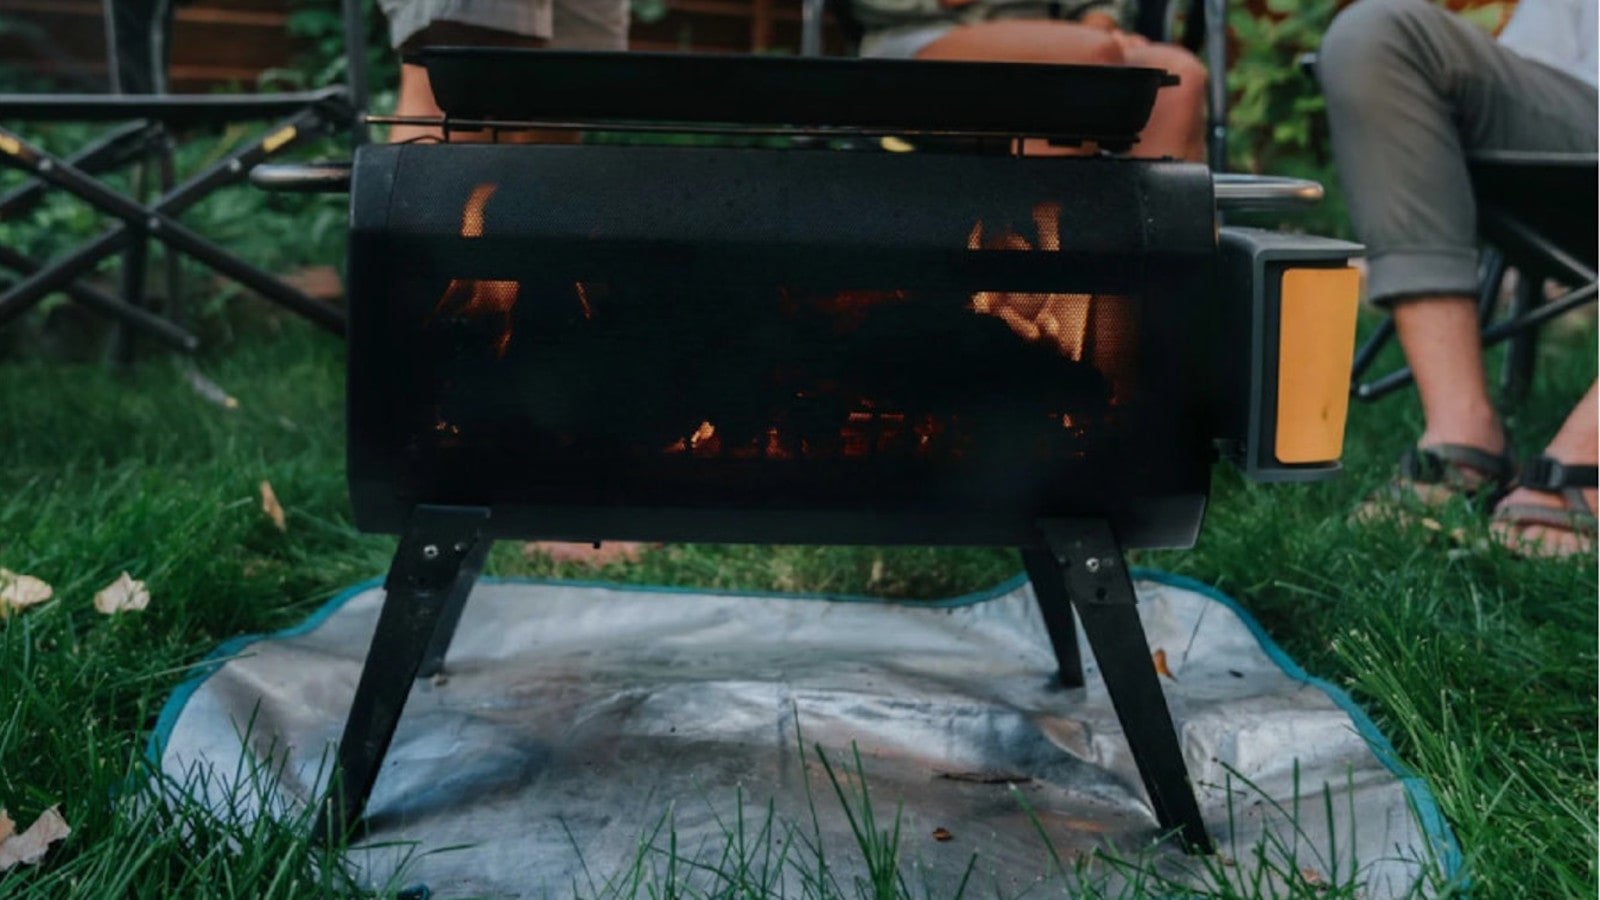 BioLite FirePit Cooking Kit includes the wood & charcoal-burning FirePit+ and accessories